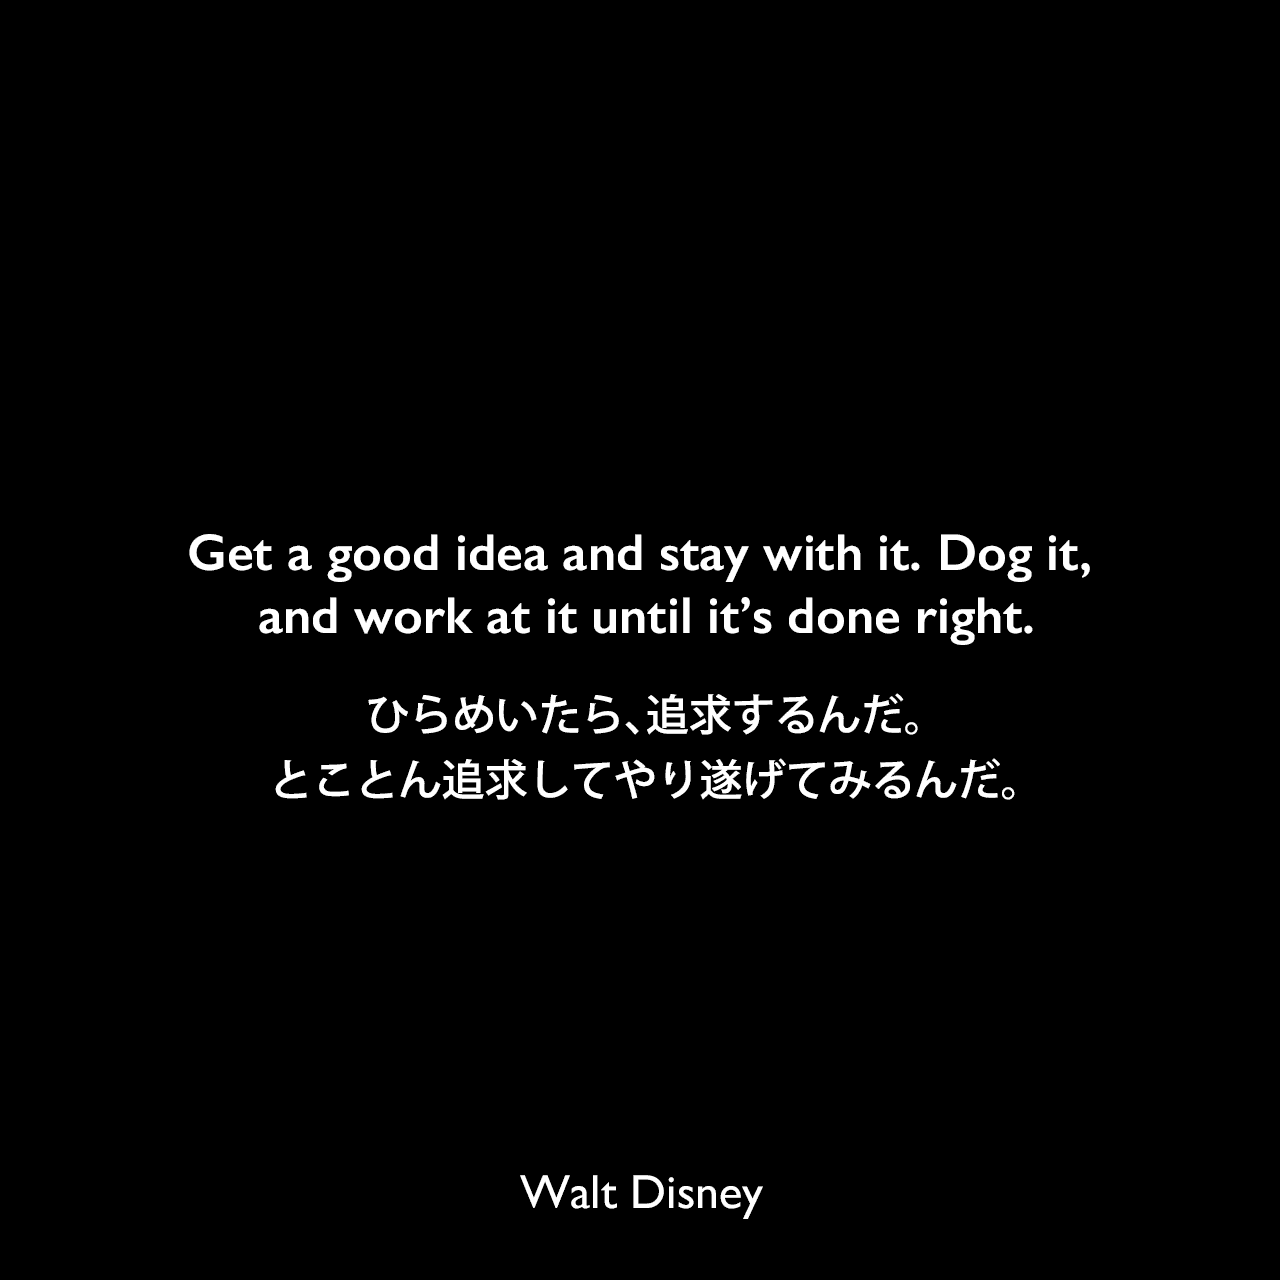 Get a good idea and stay with it. Dog it, and work at it until it’s done right.ひらめいたら、追求するんだ。とことん追求してやり遂げてみるんだ。Walt Disney